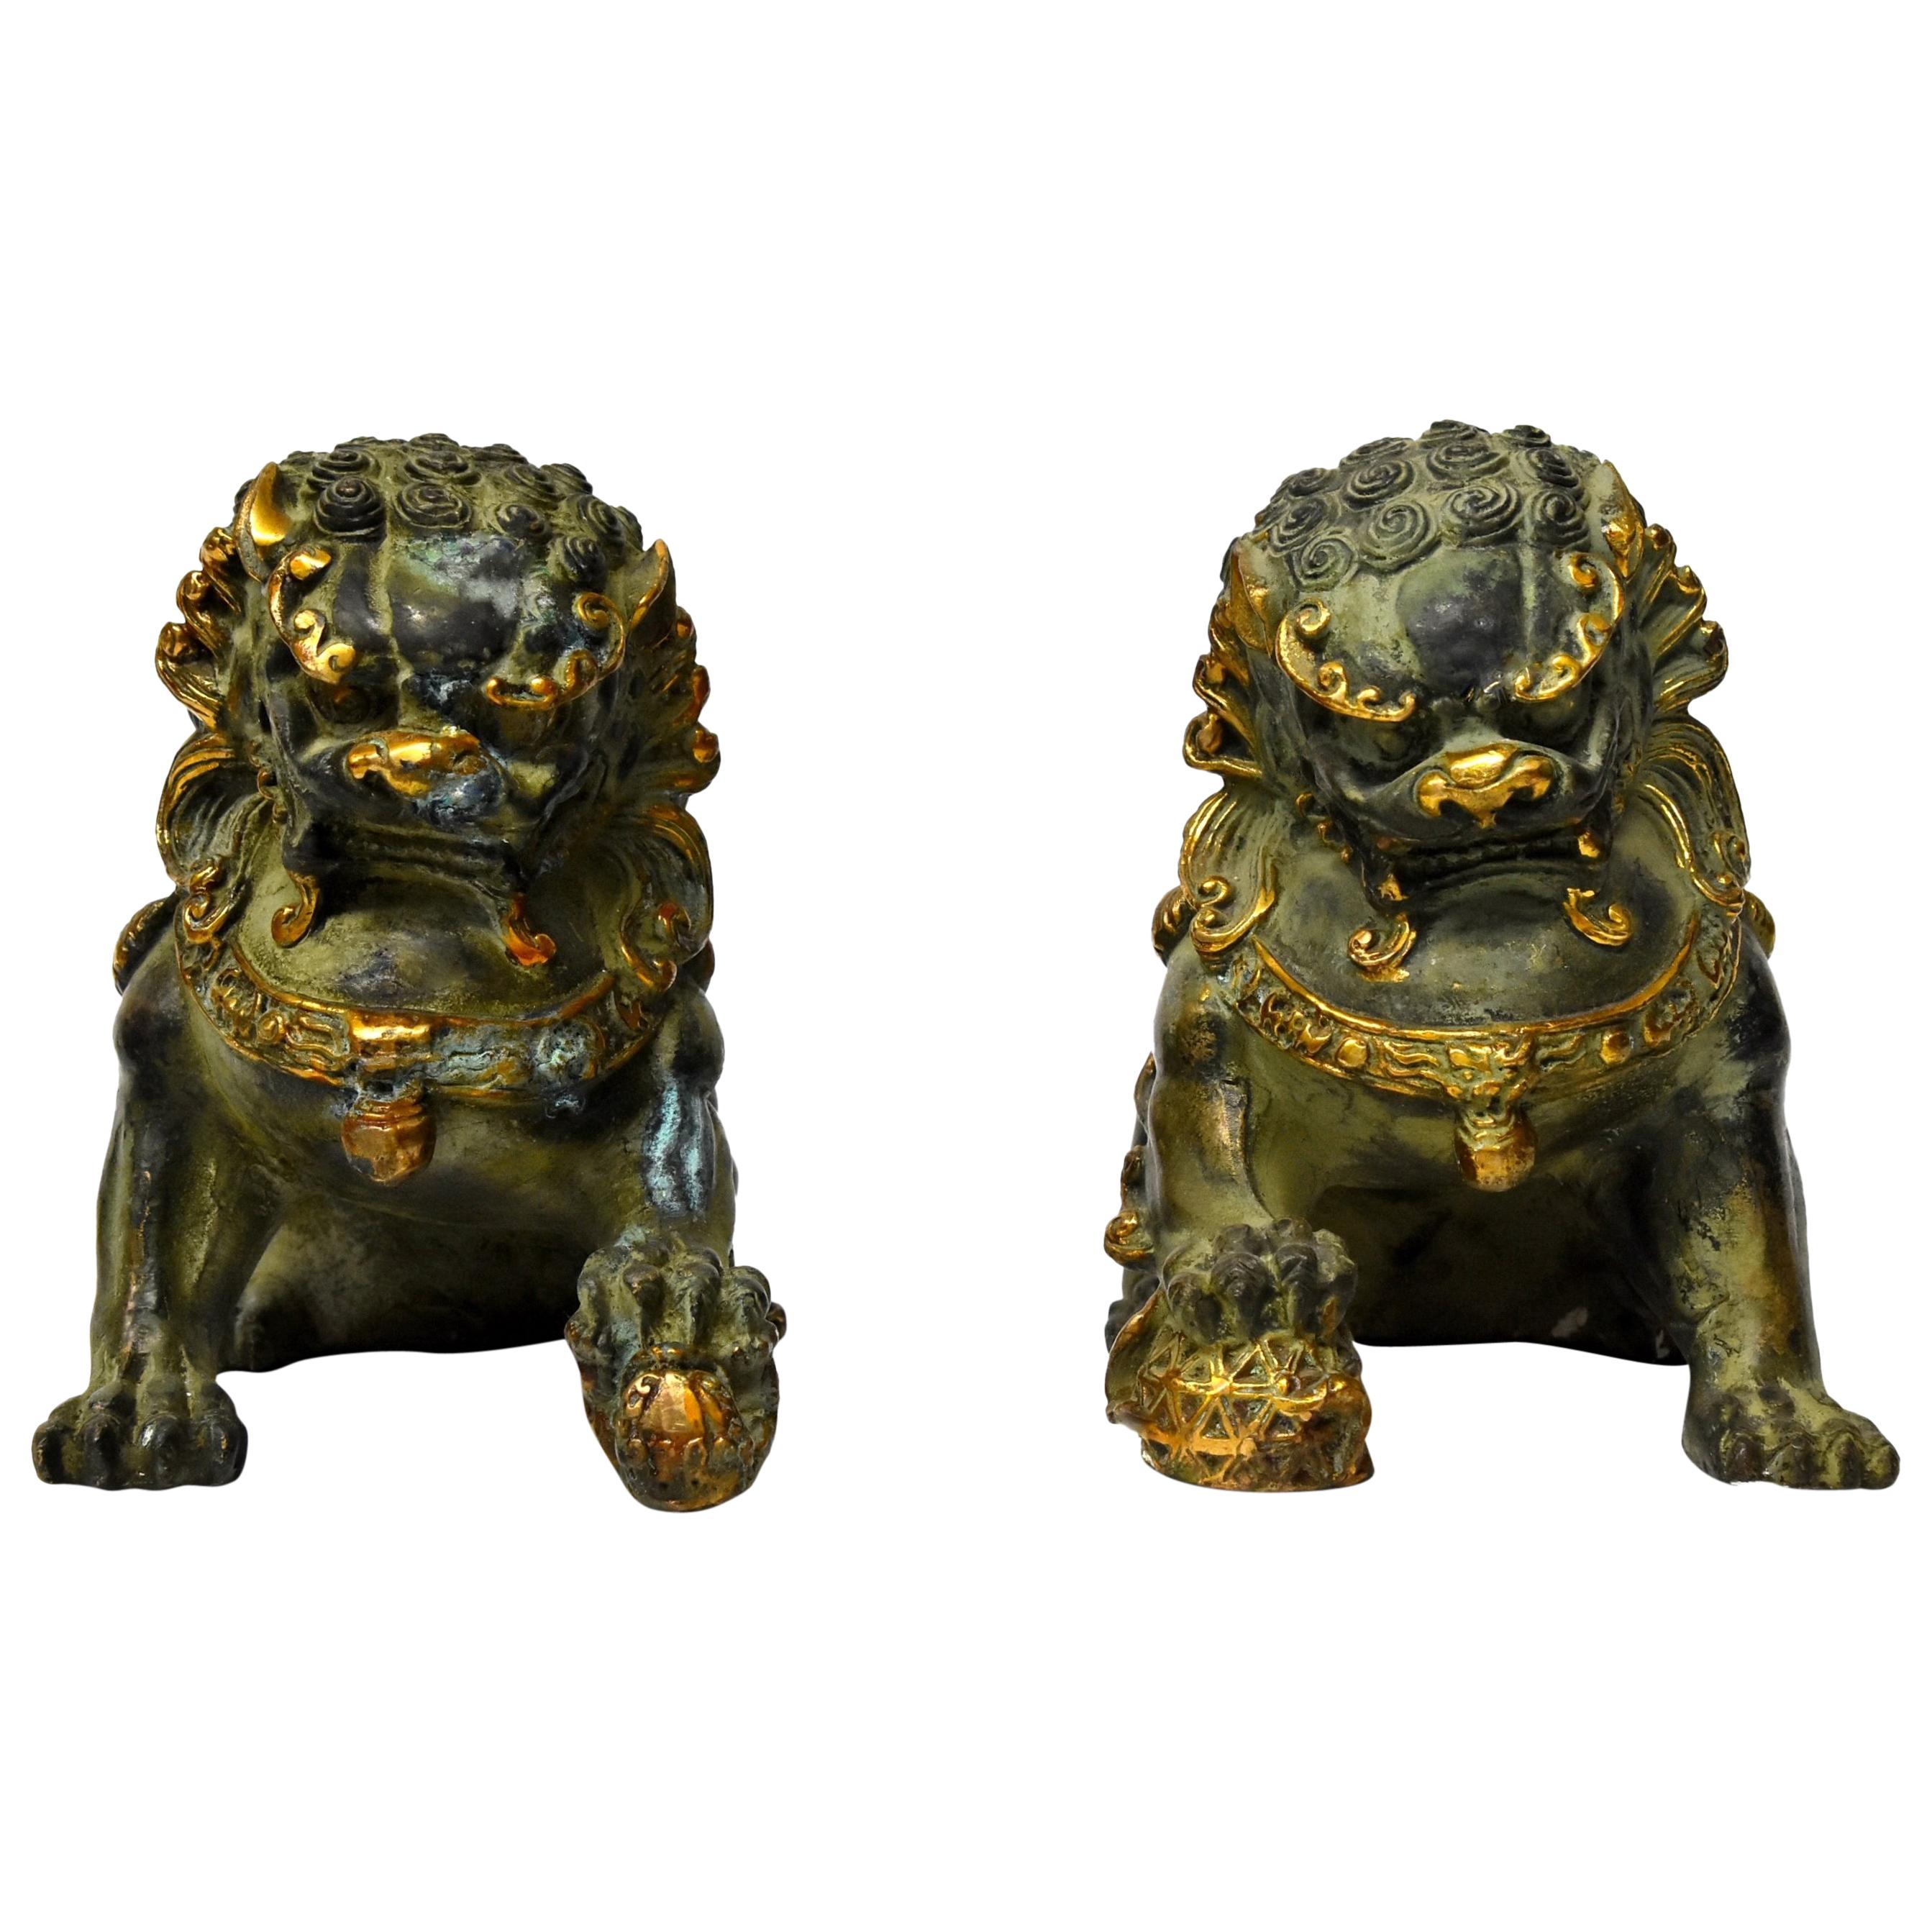 Pair of Gilded Bronze Foo Dogs